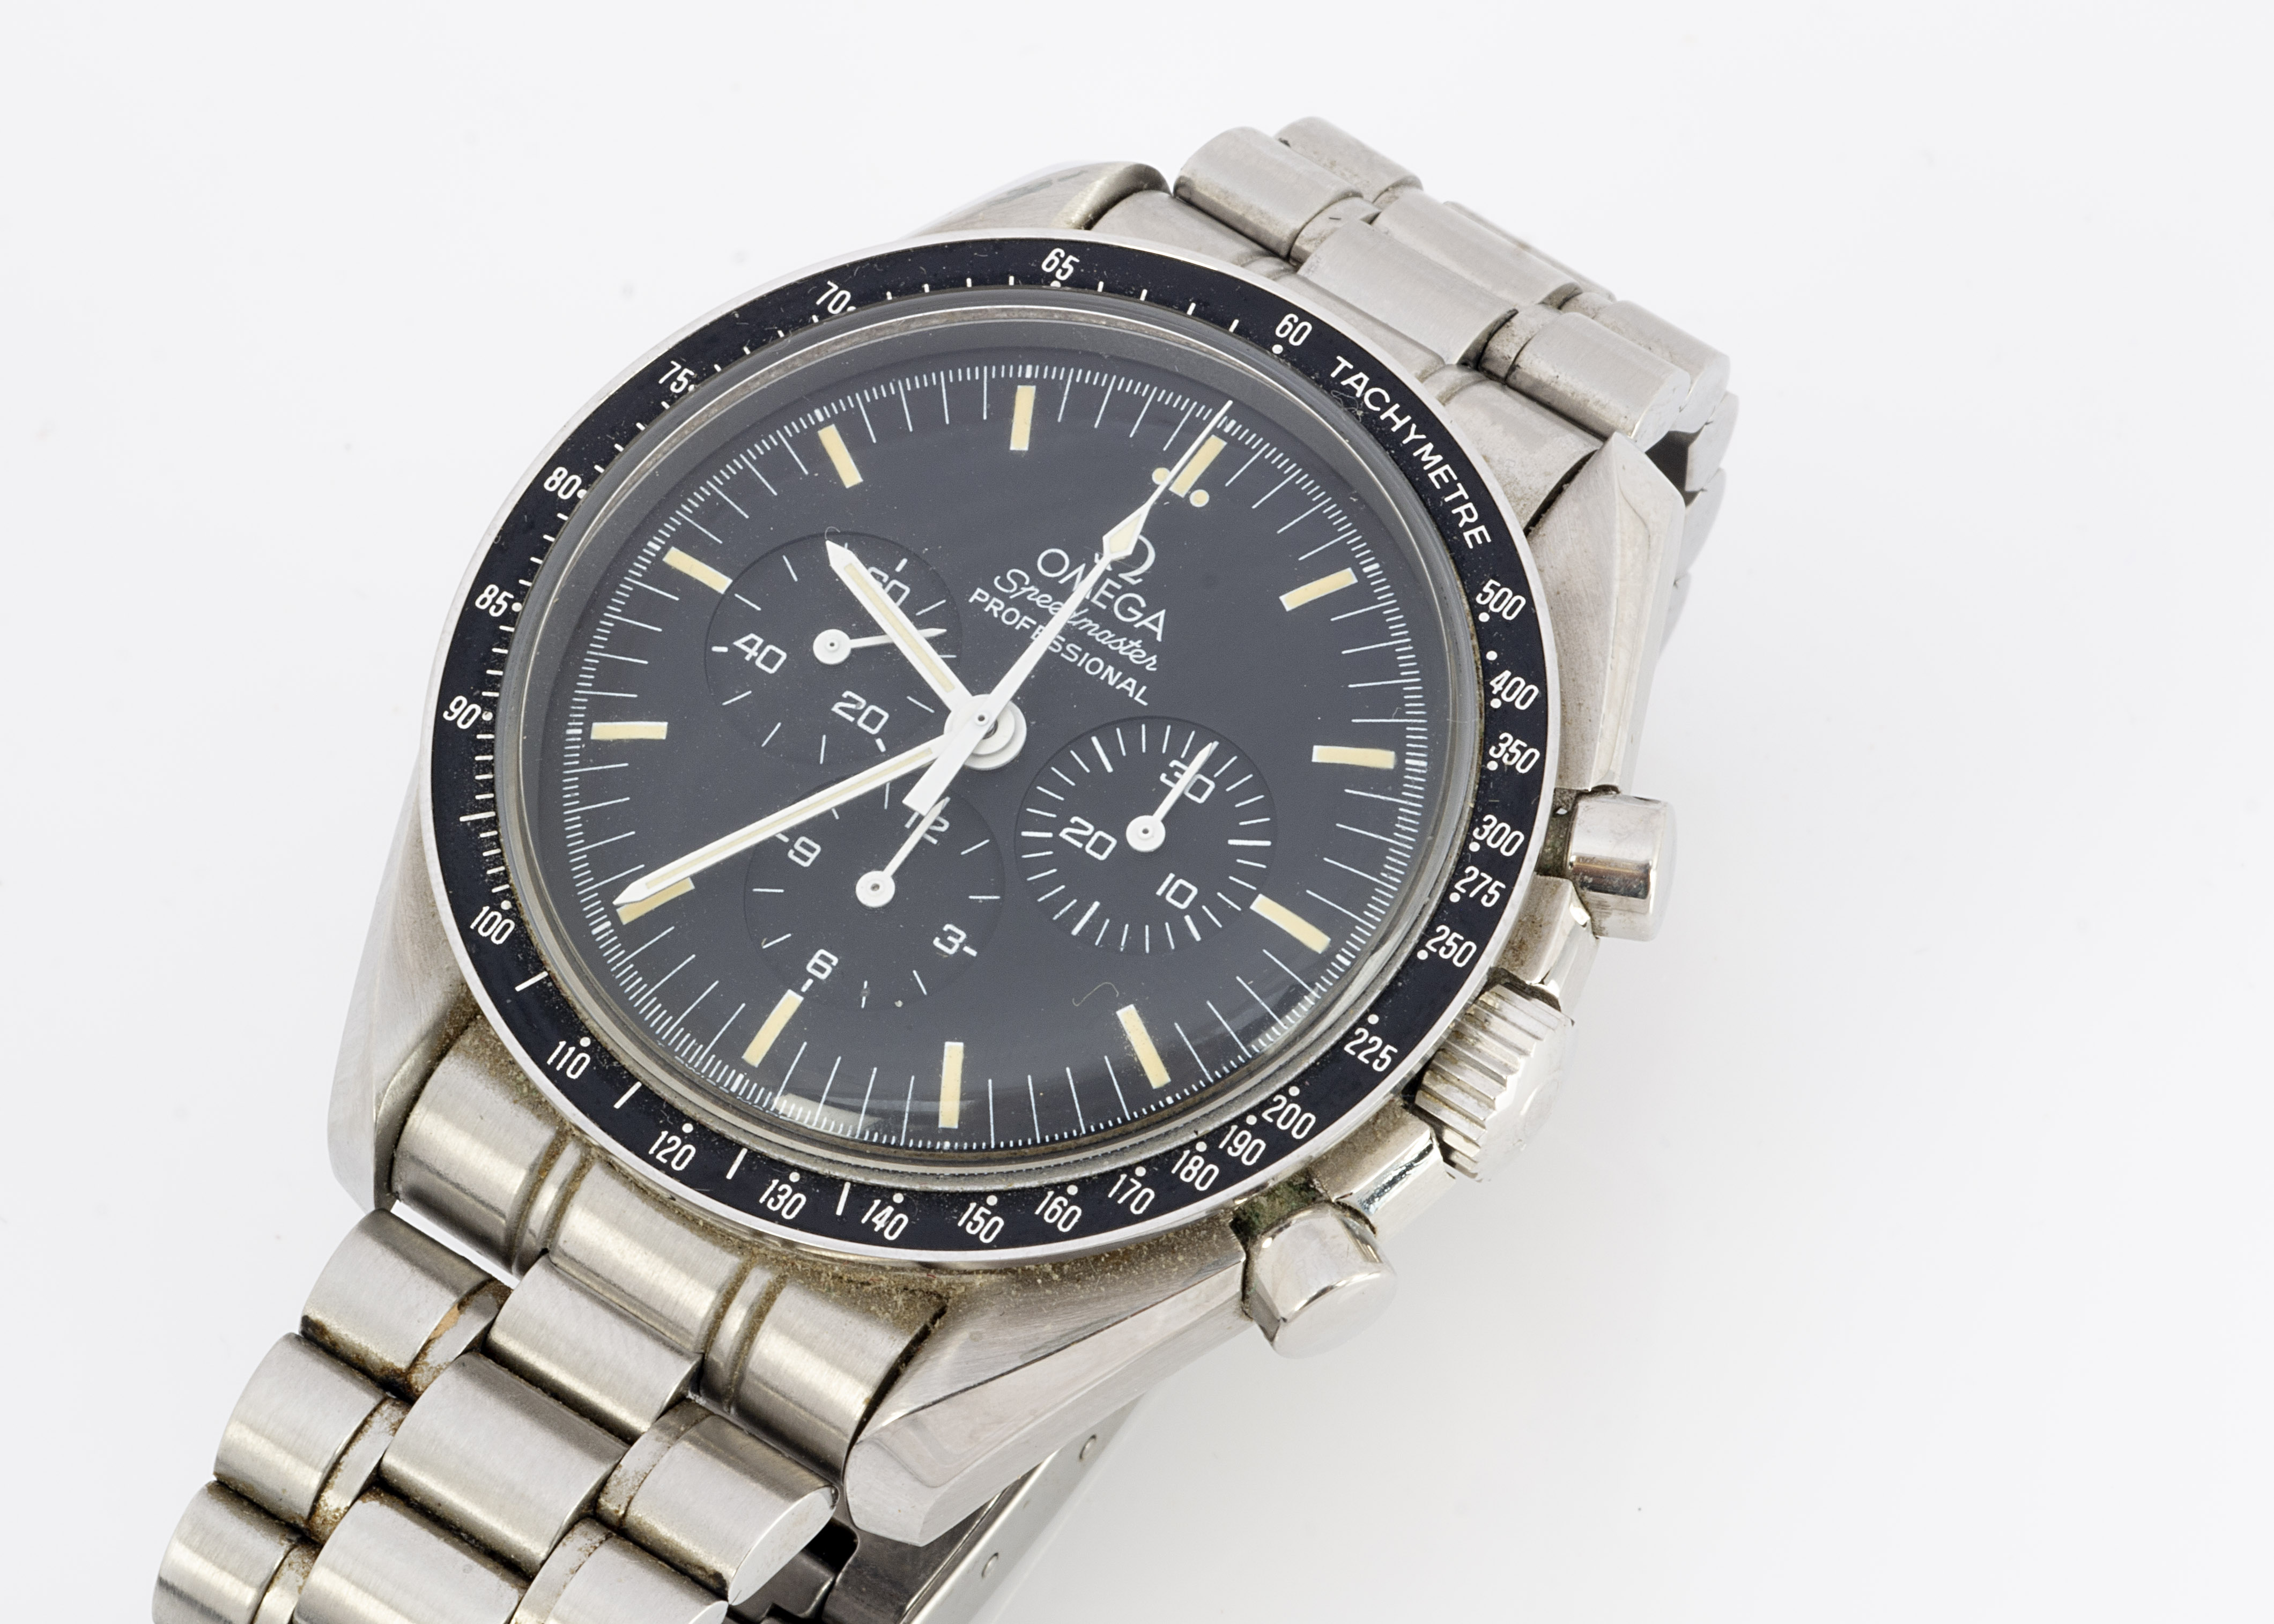 OMEGA, A 1980s Omega Speedmaster Professional manual wind "The First Watch Worn On The Moon"